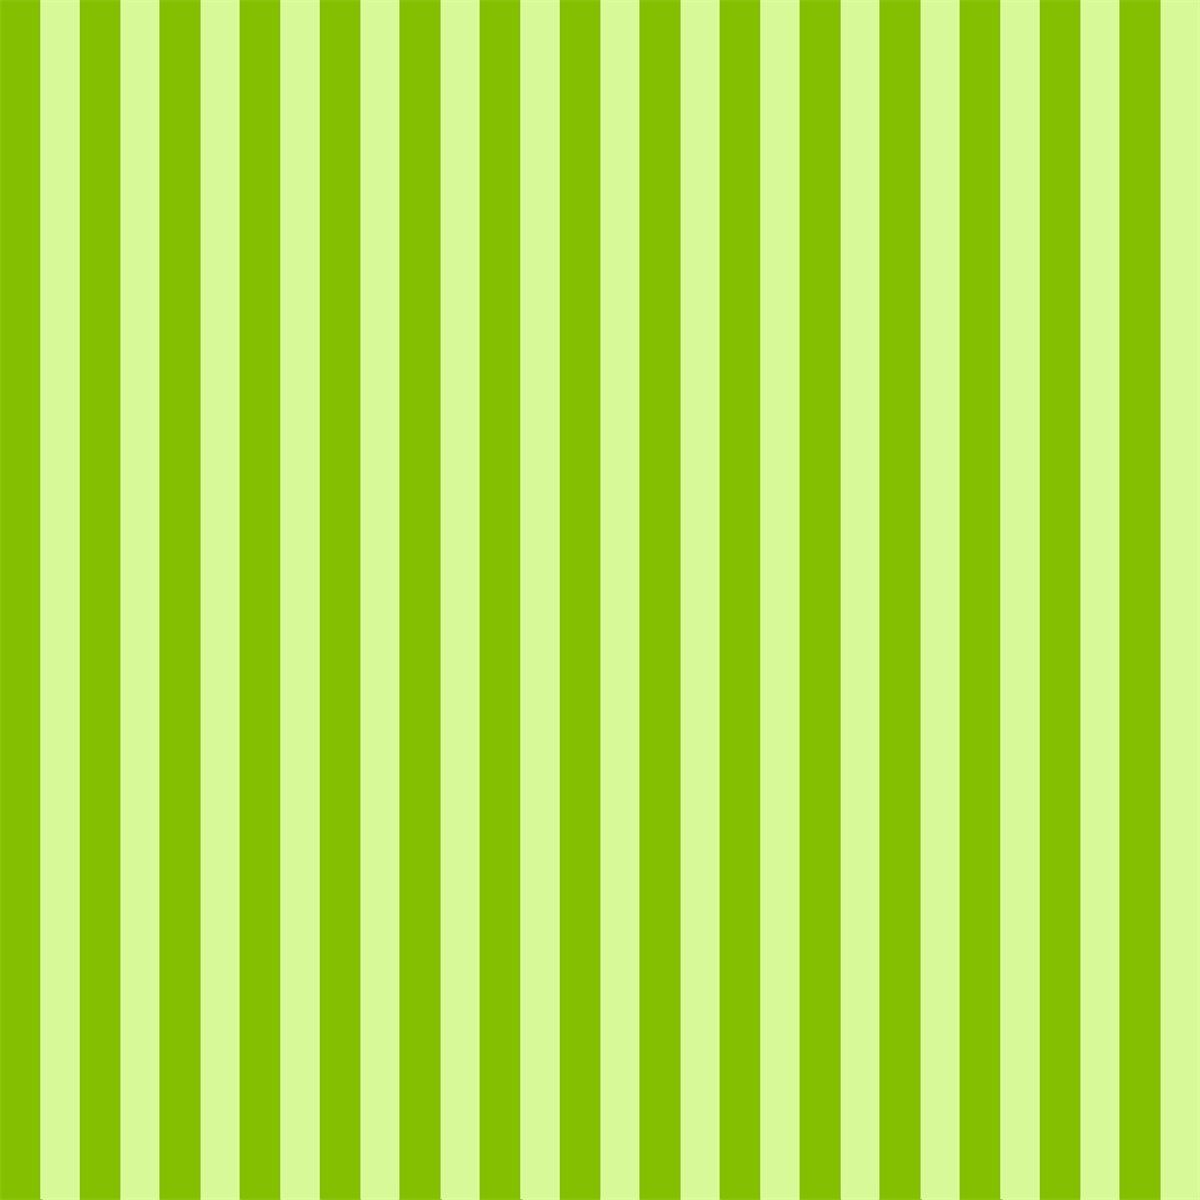 Light Green and Green Stripes Photography Backdrops for Picture